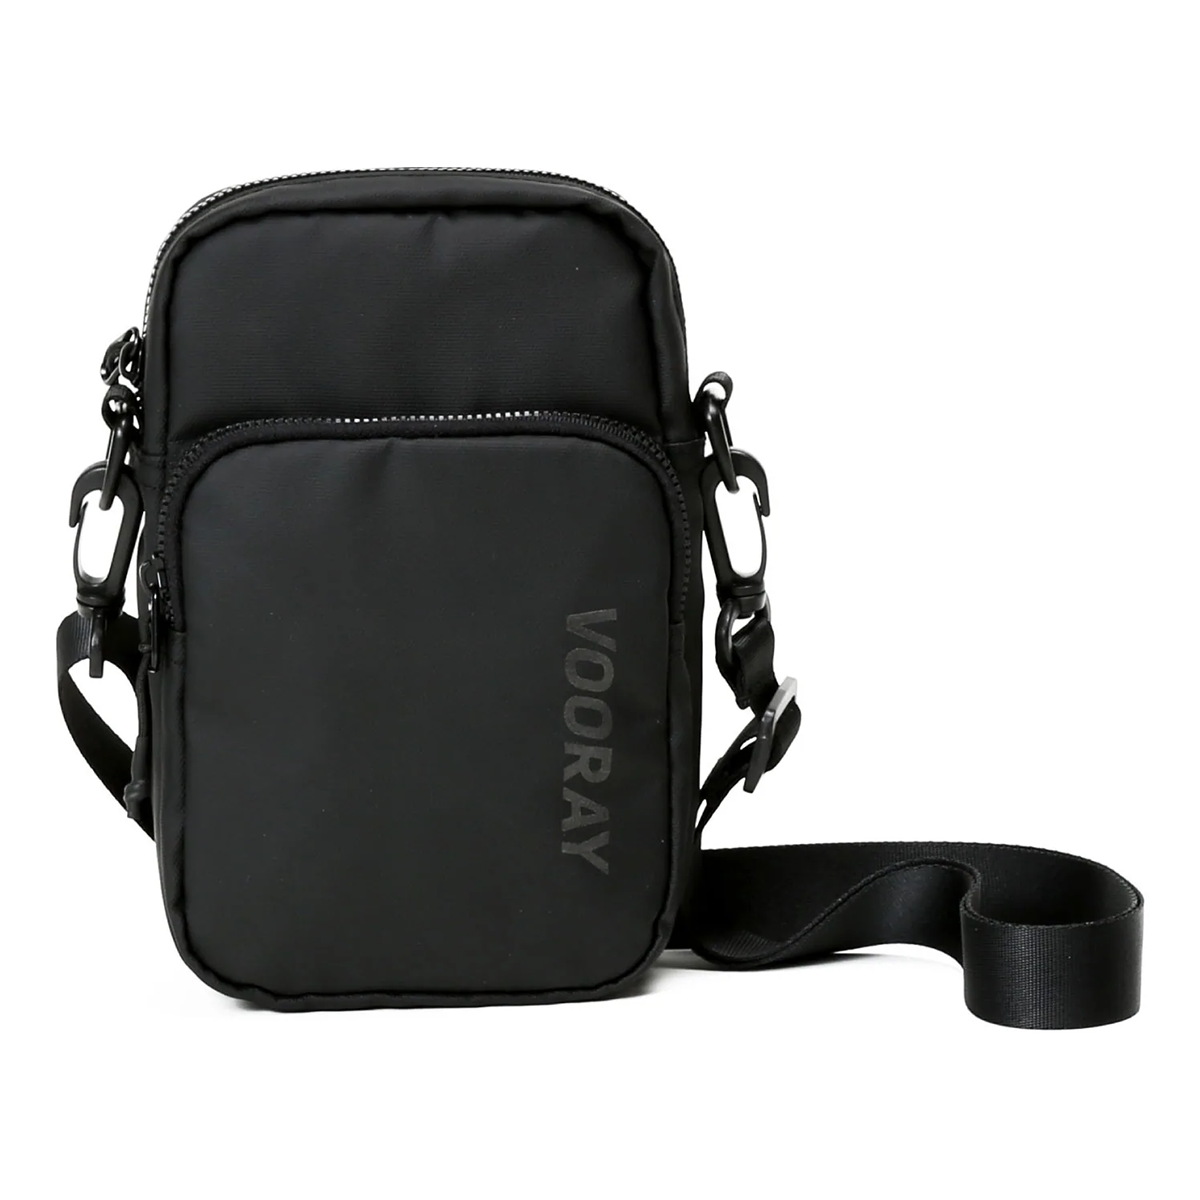 Vooray Core Crossbody Bag, , large image number null